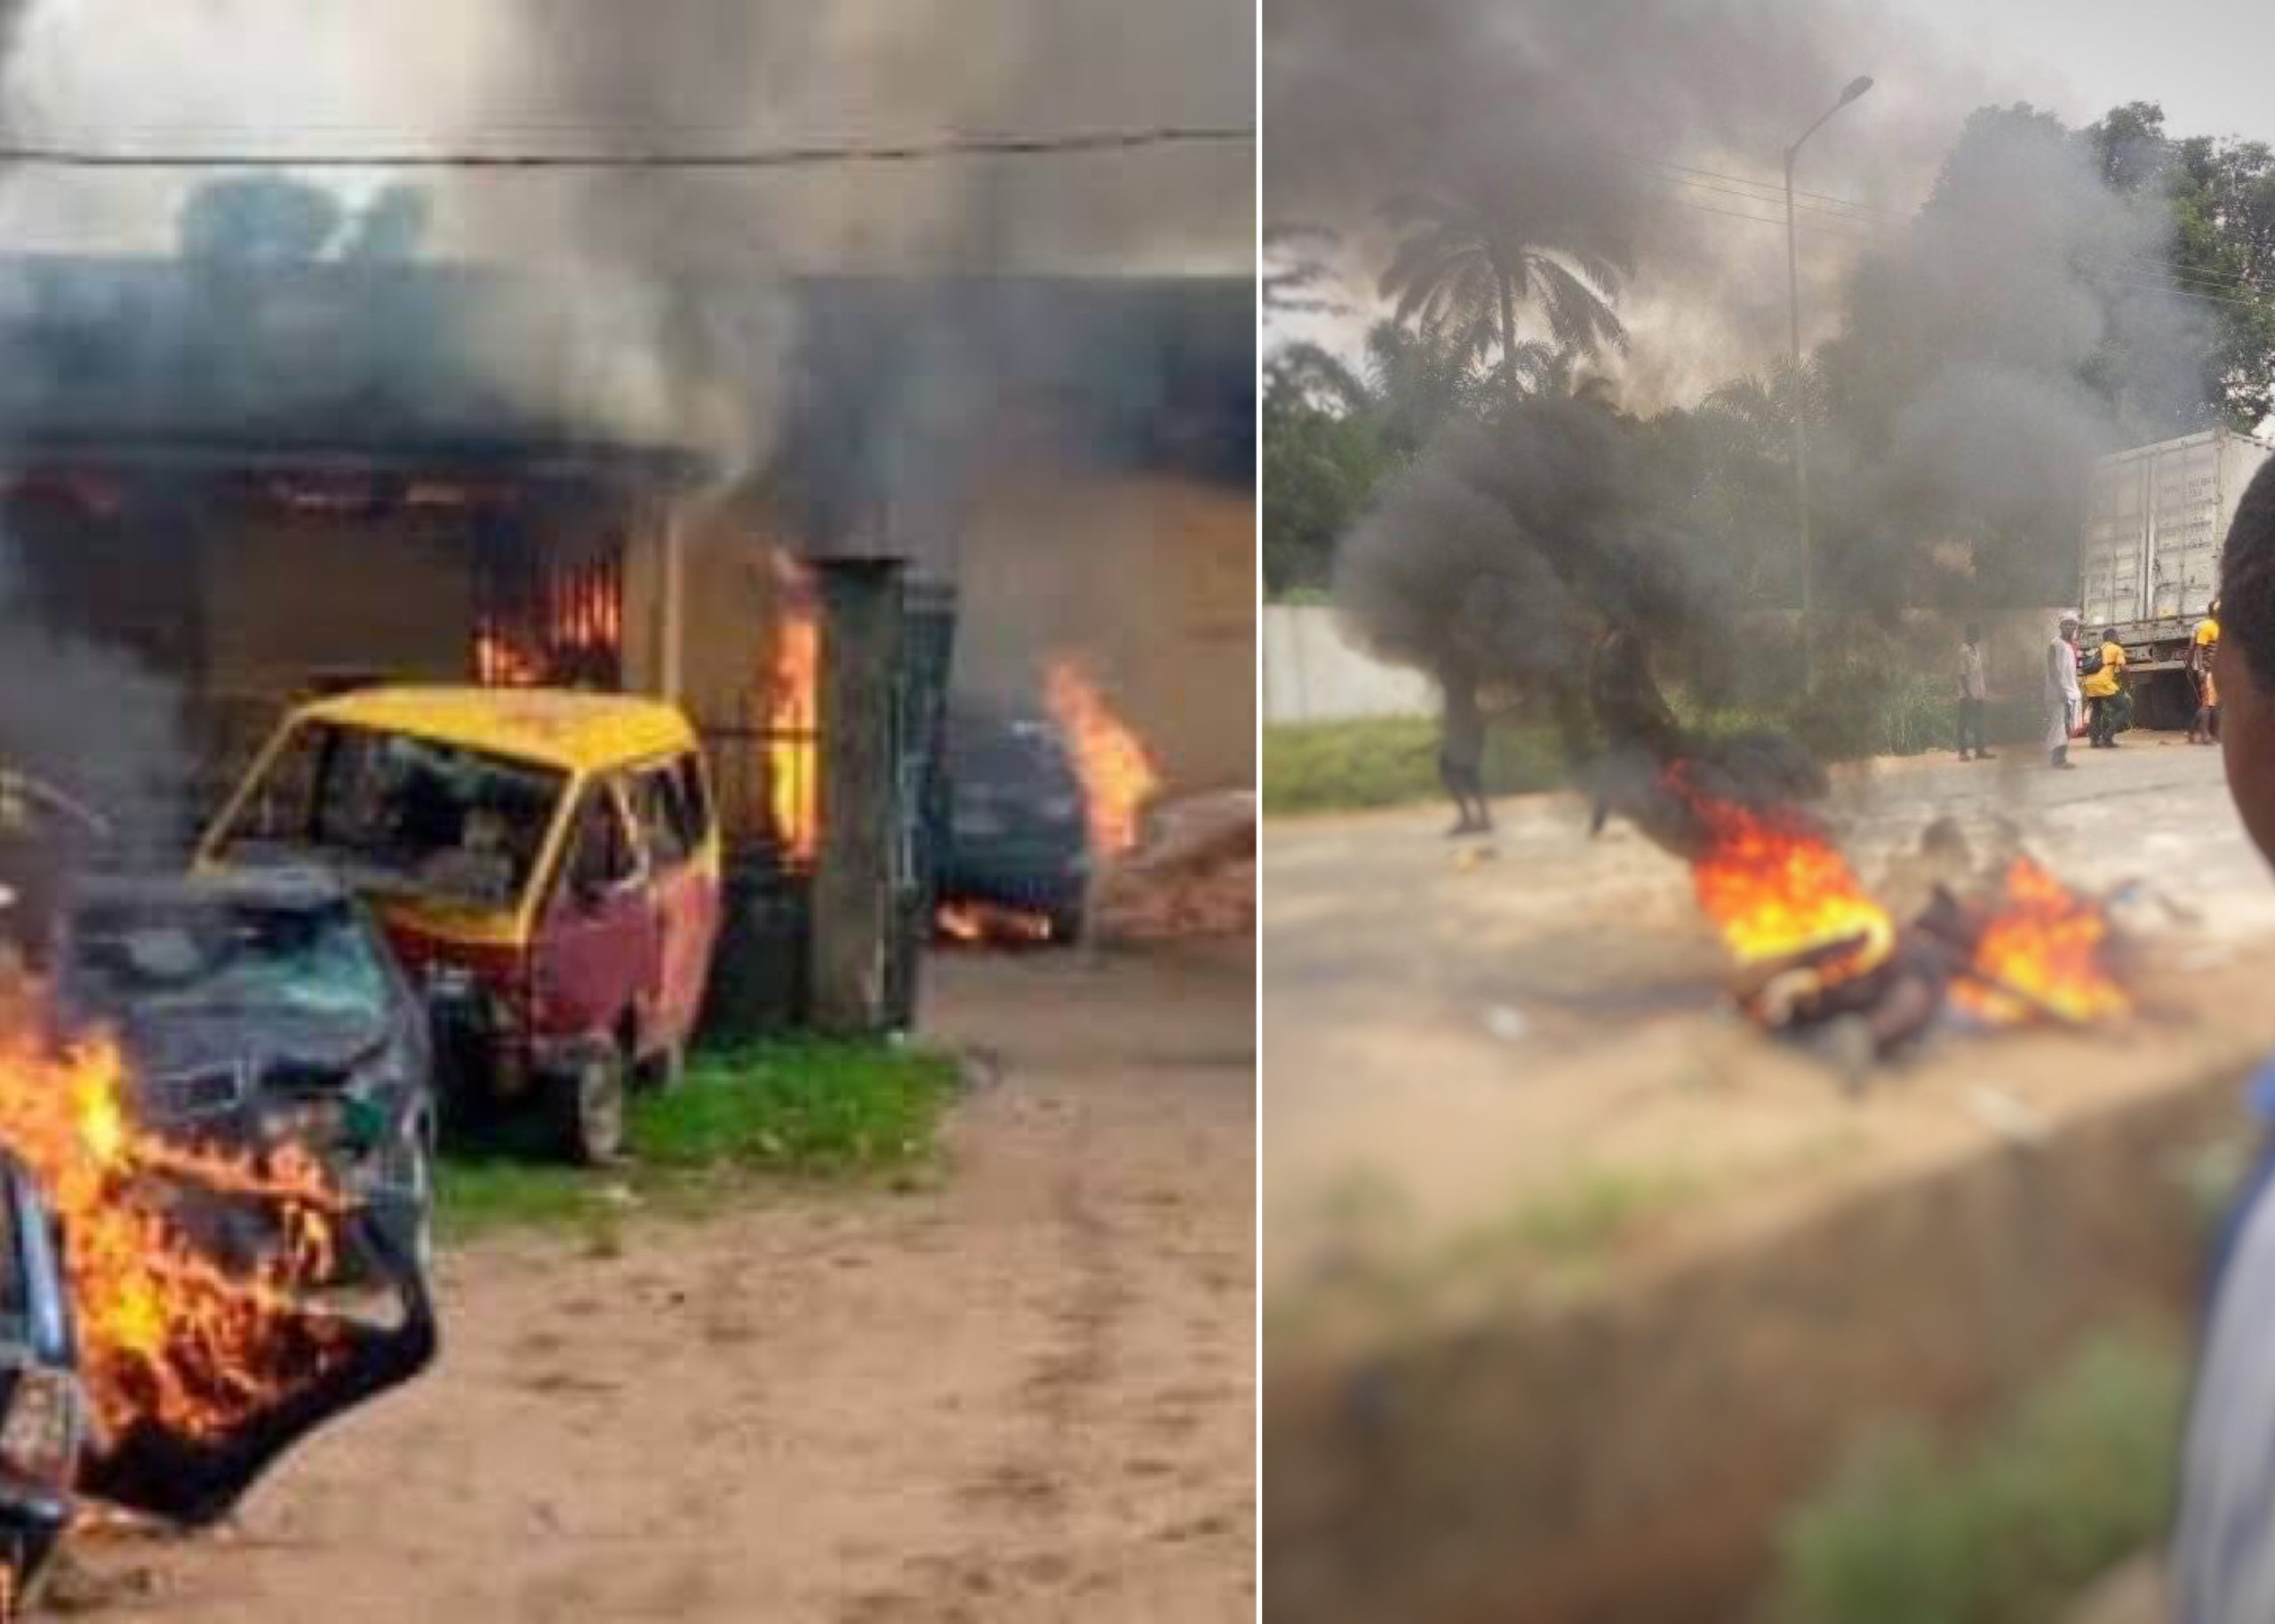 #EndSARS: 21 Stations Attacked, 7 Burnt, Policeman Beheaded - Anambra Police